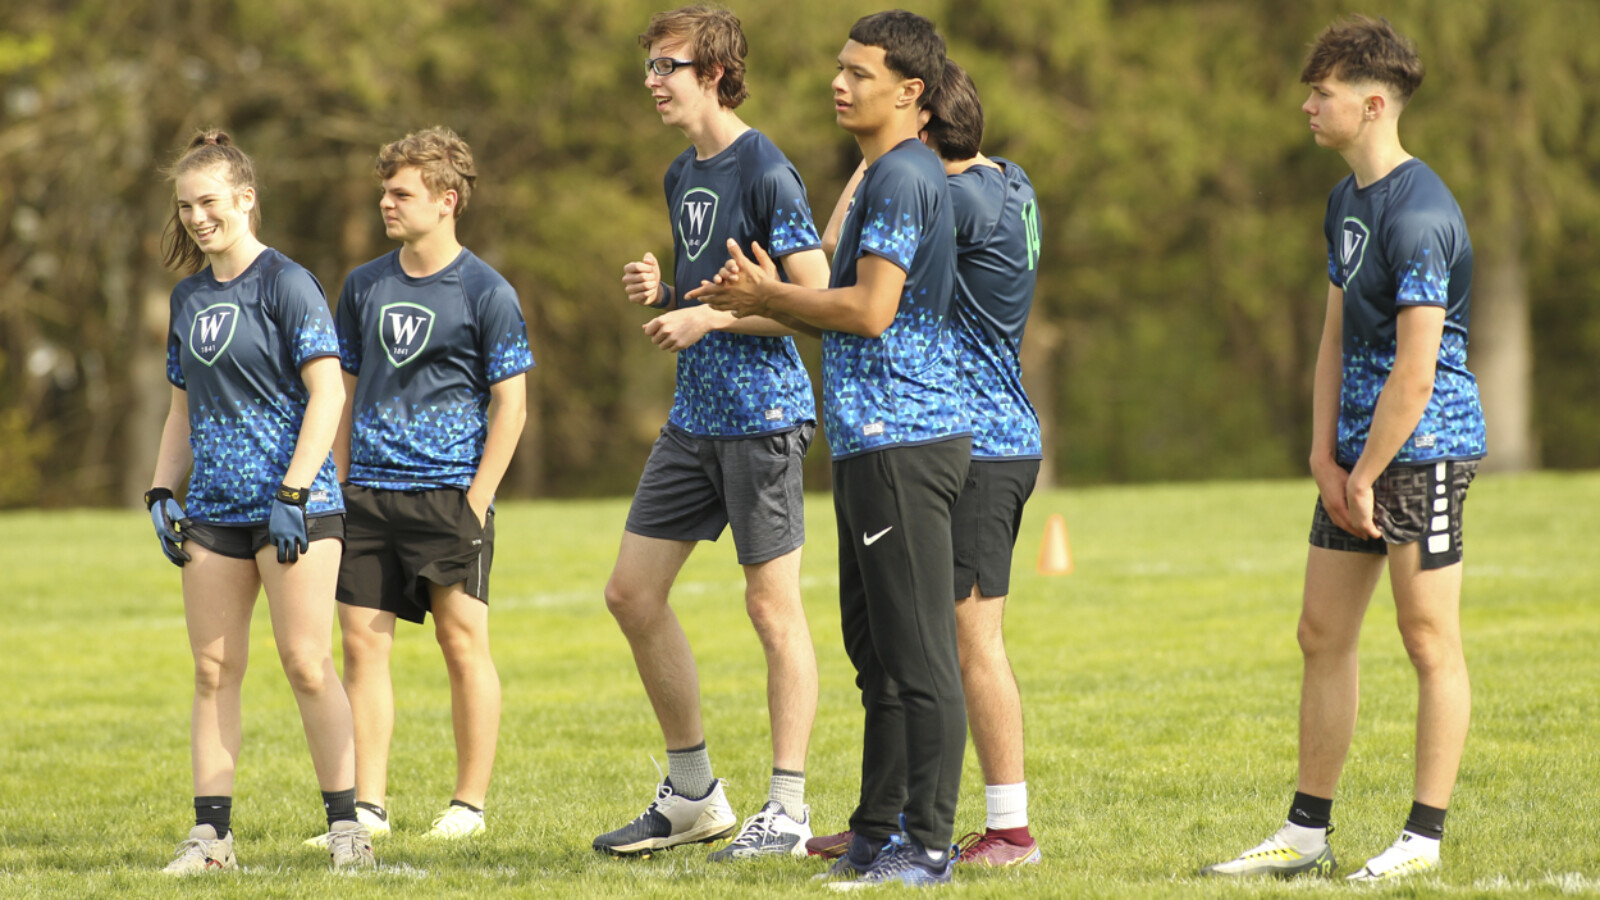 ultimate players on a field